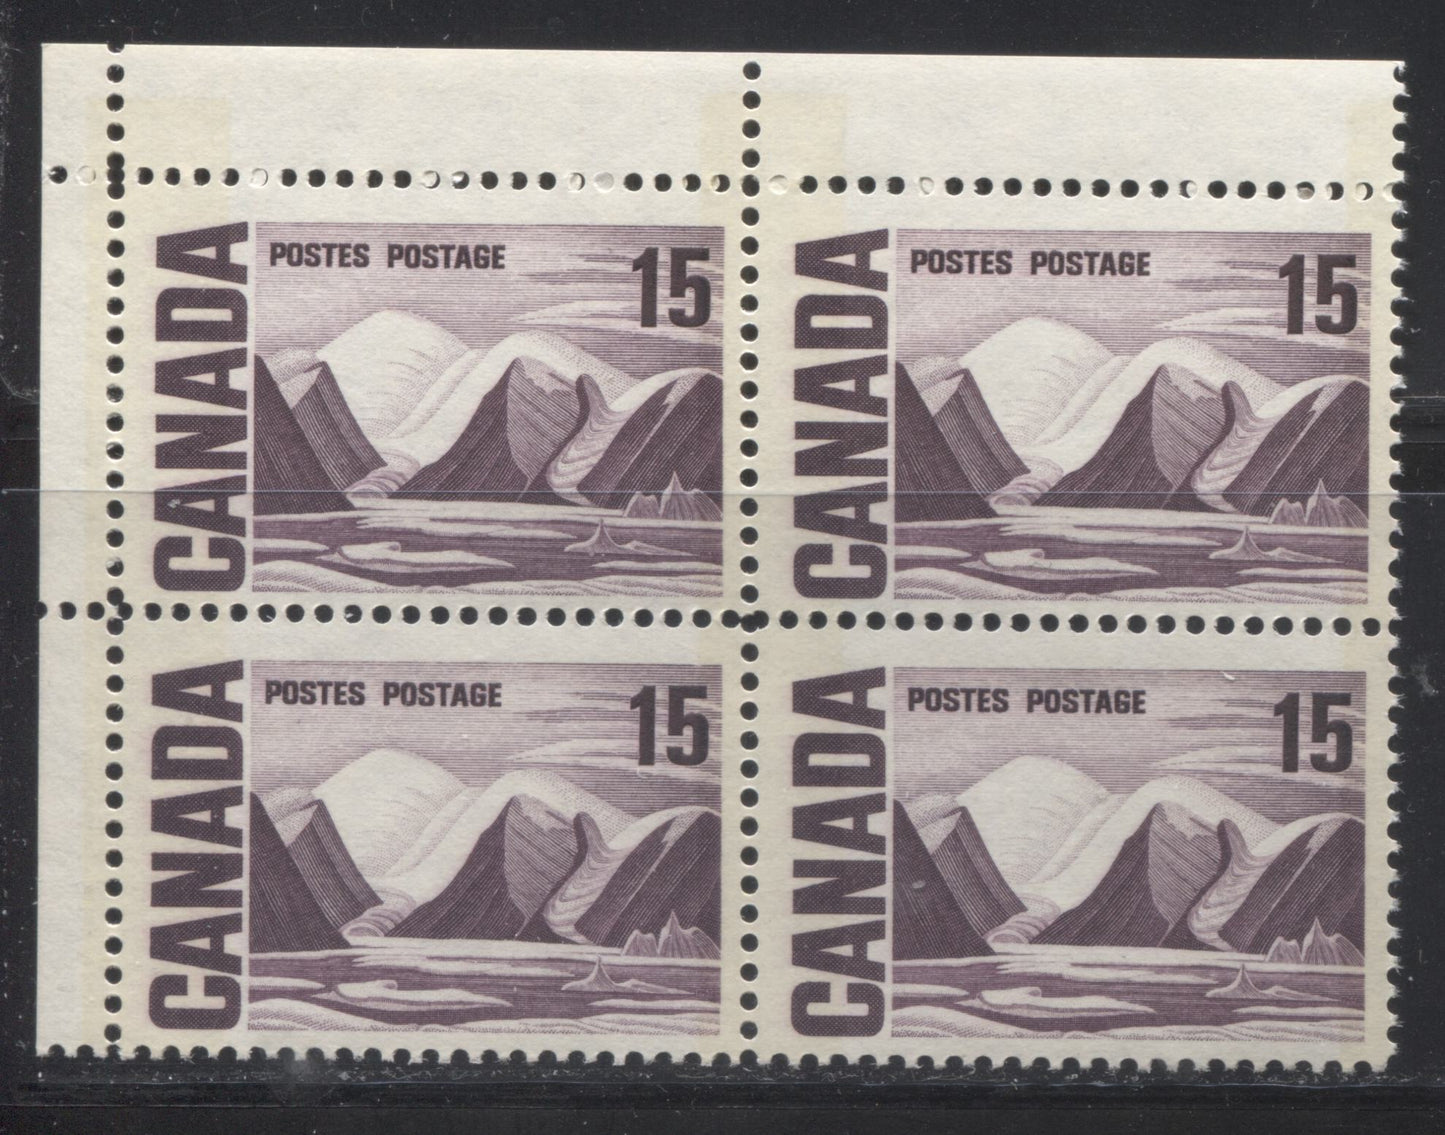 Lot 42 Canada #463pii 15c Plum Greenland Mountains, 1967-1973 Centennial Definitive Issue, A FNH UL W2B Tagged Field Stock Block Of 4 On DF Vertical Wove Paper With Eggshell PVA Gum, Light Tagging